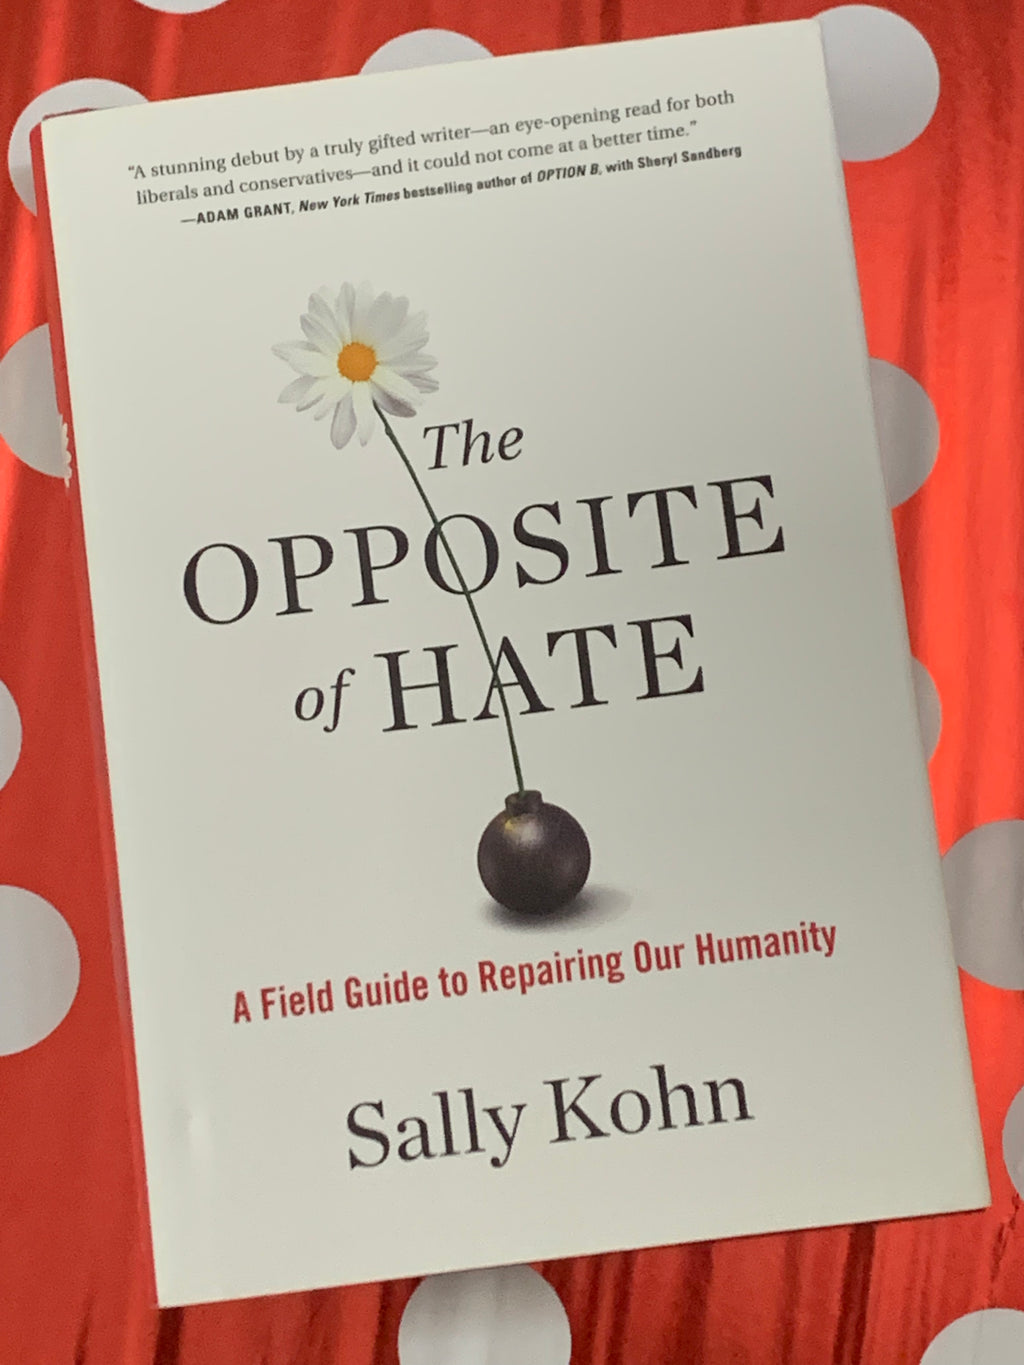 The Opposite of Hate: A Field Guide to Repairing Our Humanity- By Sally Kohn